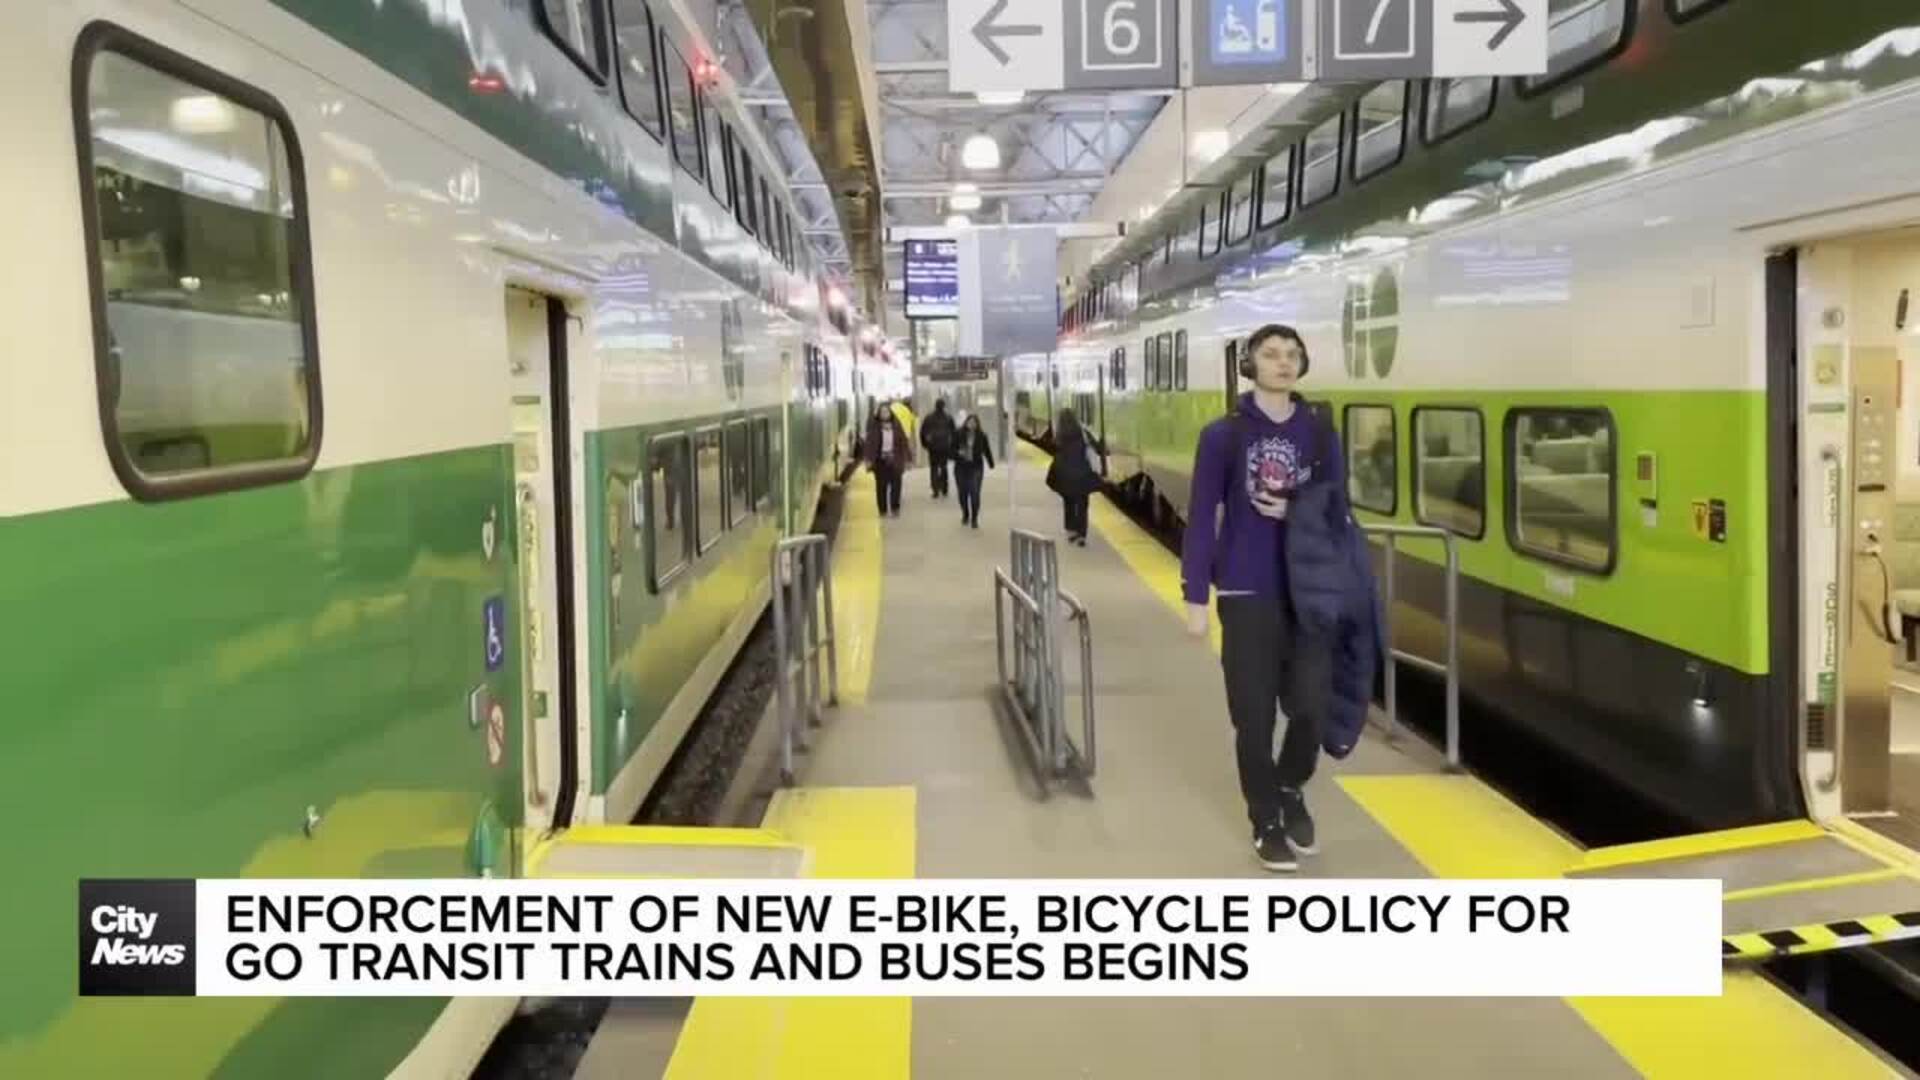 New GO Transit e-bike, bicycle policy begins